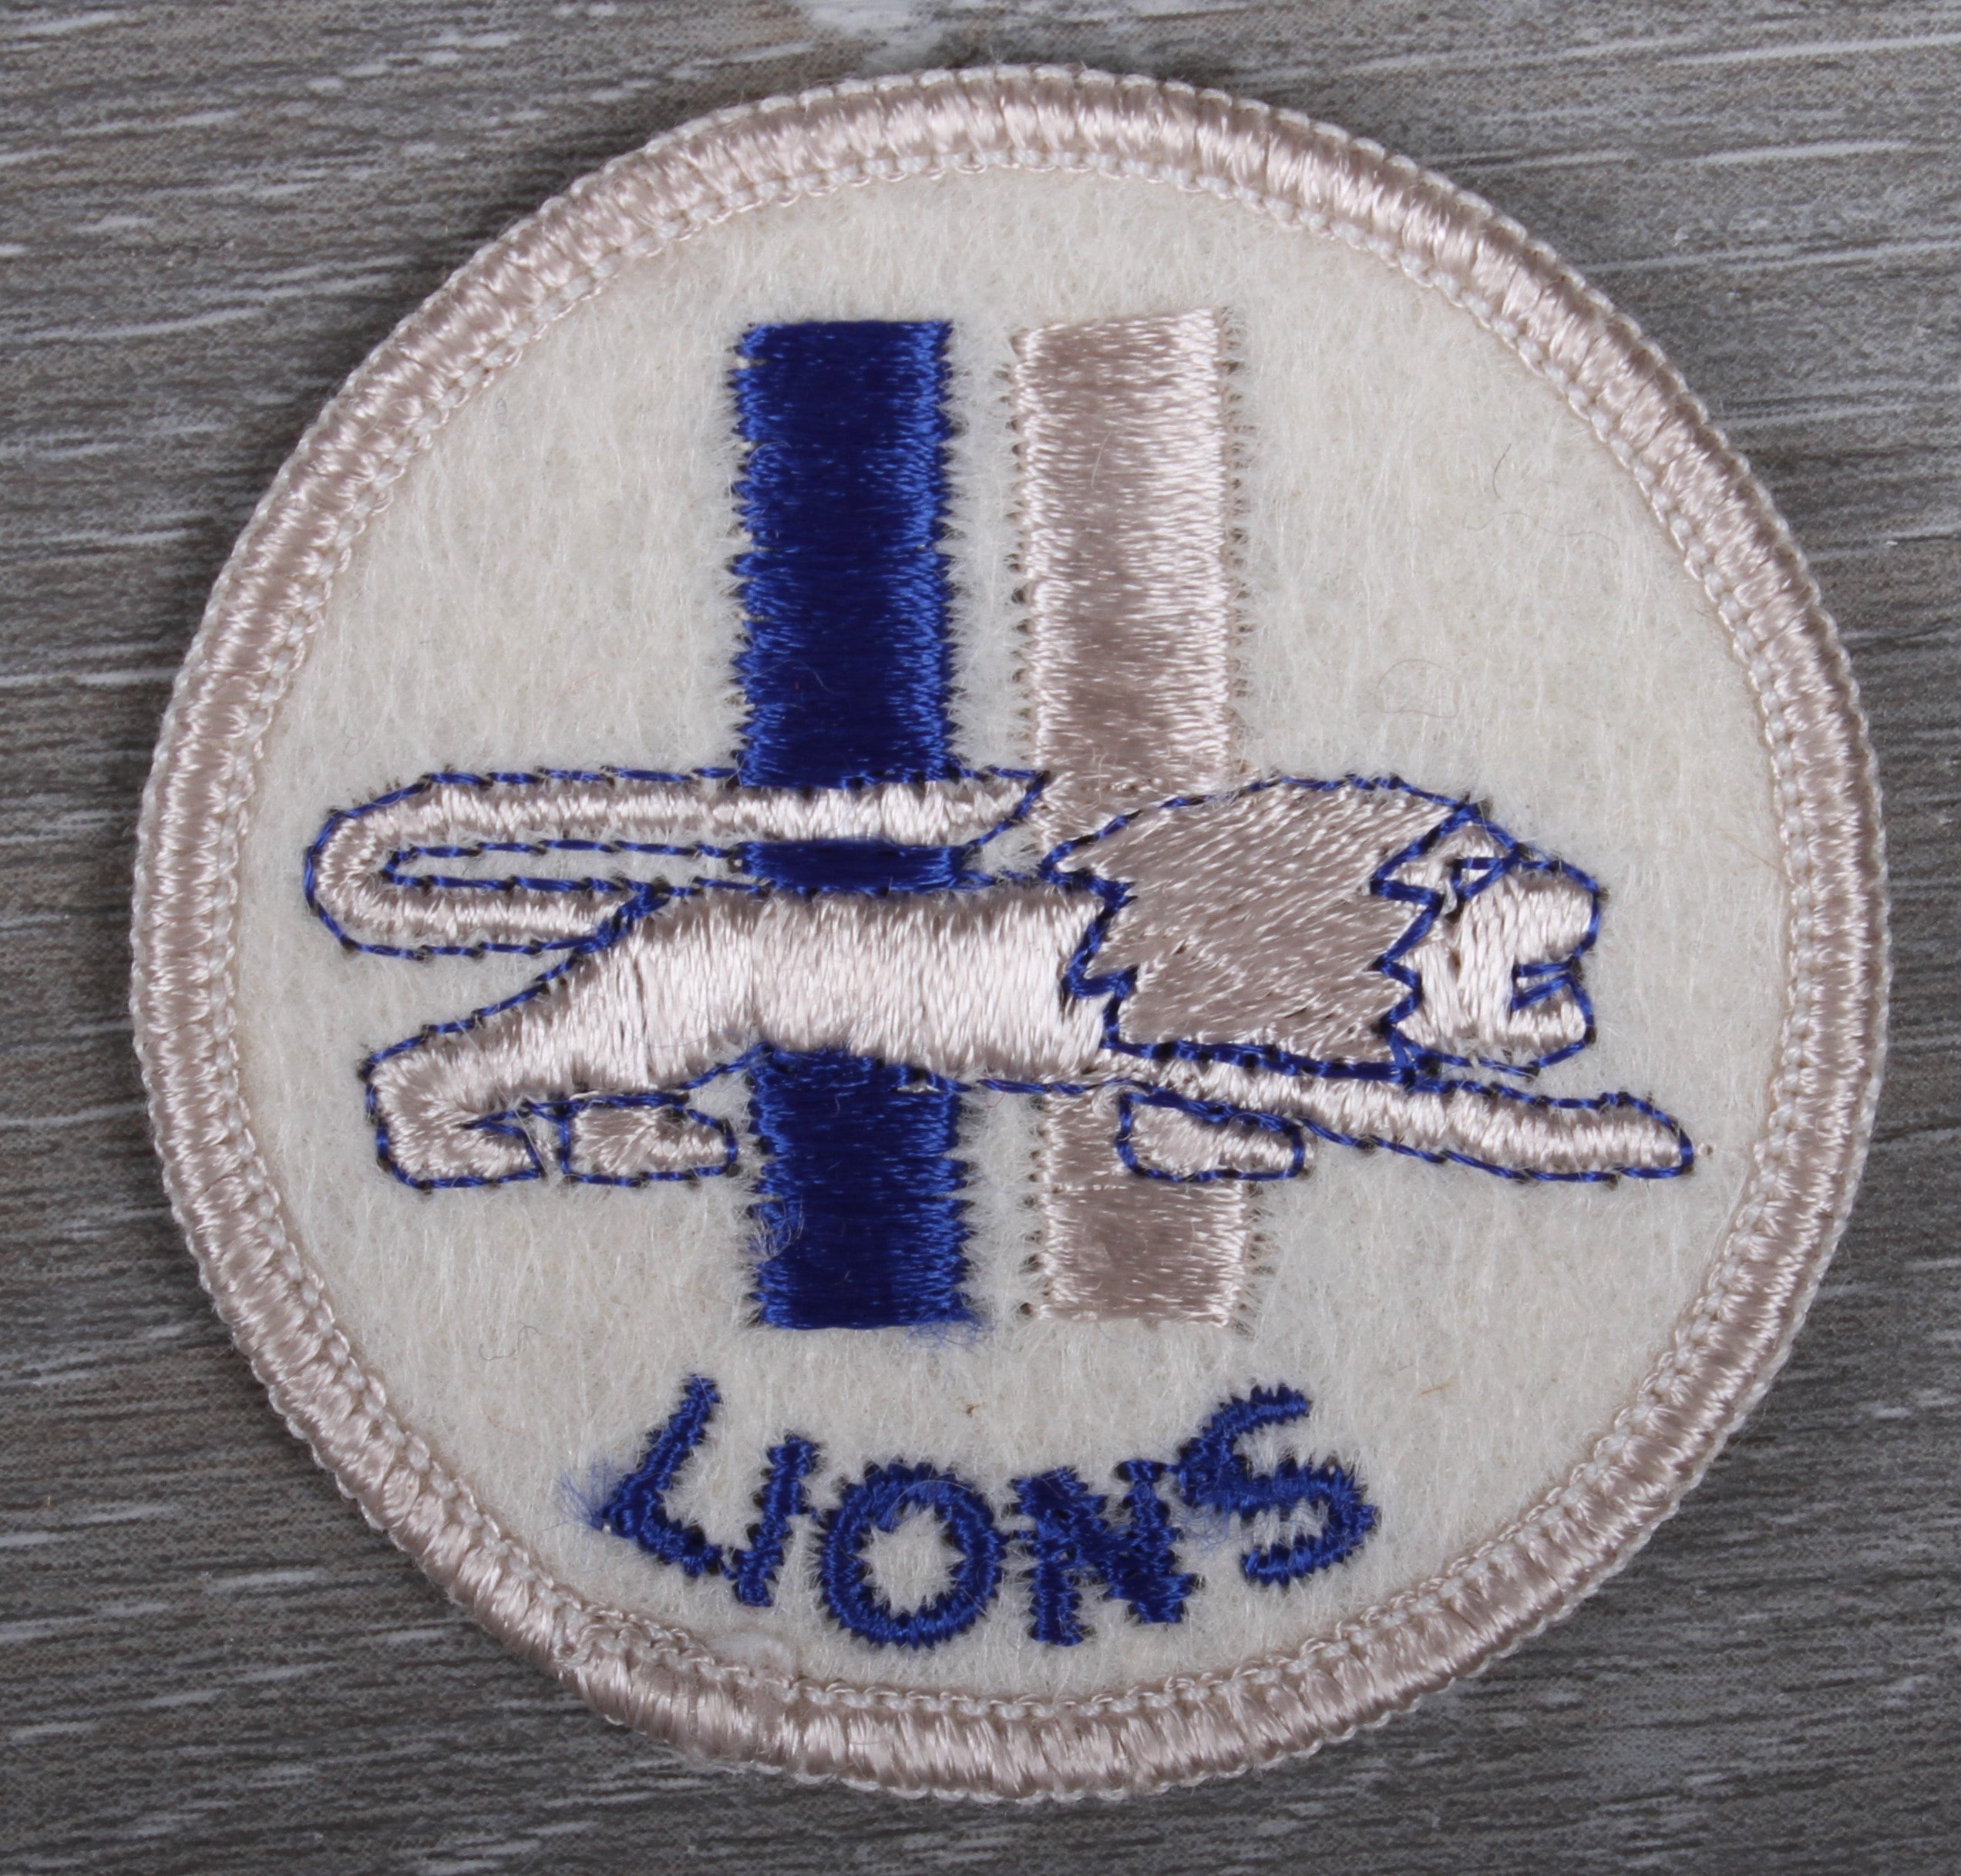 DETROIT LIONS EMBROIDERED IRON ON PATCH 2.5” X 2.5” FREE SHIPPING